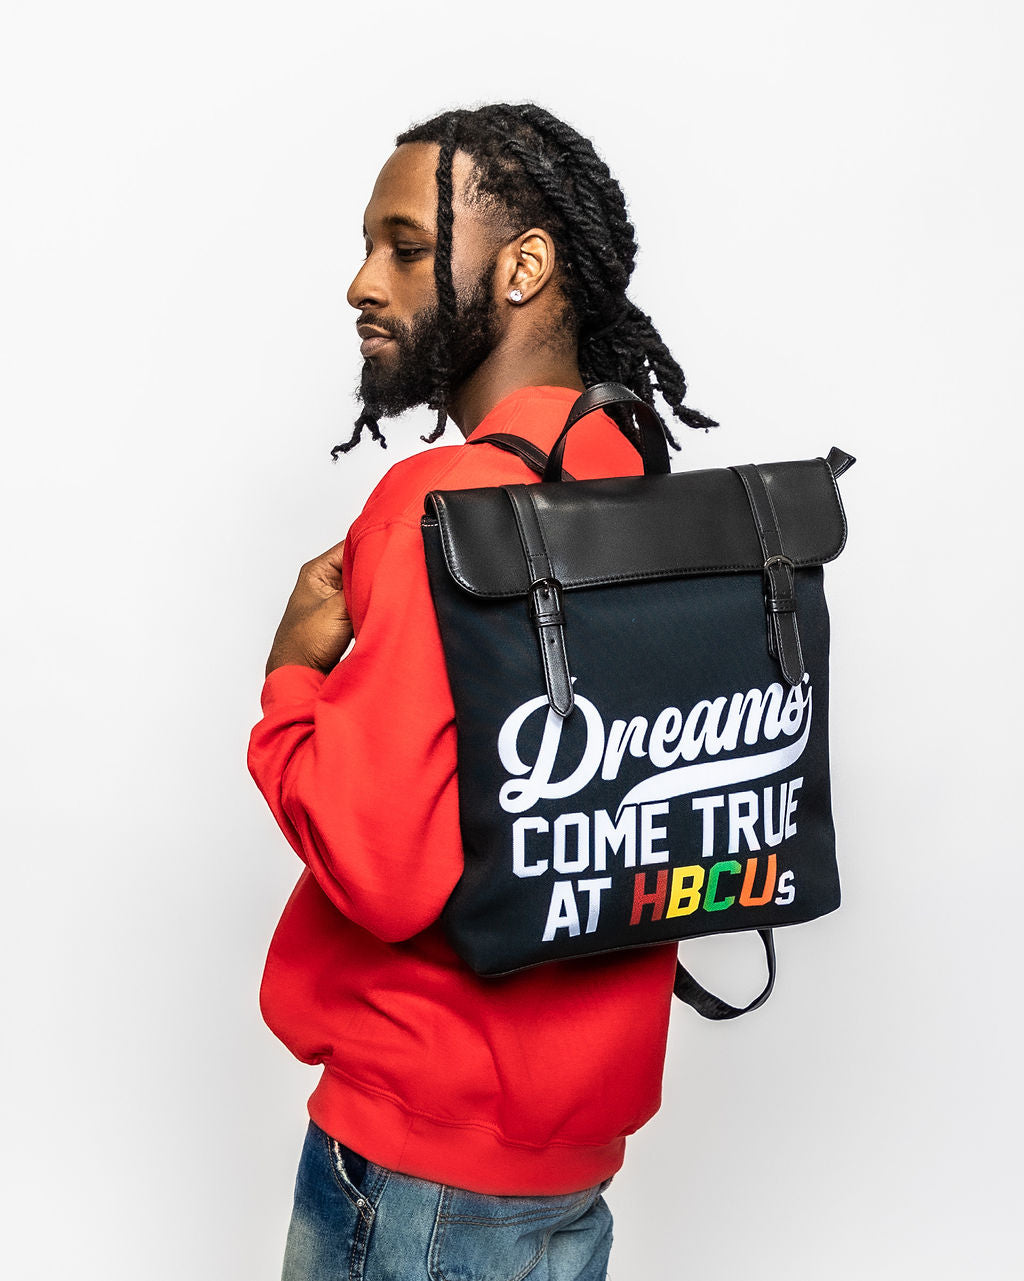 Dreams Come True at HBCUs Backpack-clothing and culture-shop here at-A Perfect Shirt